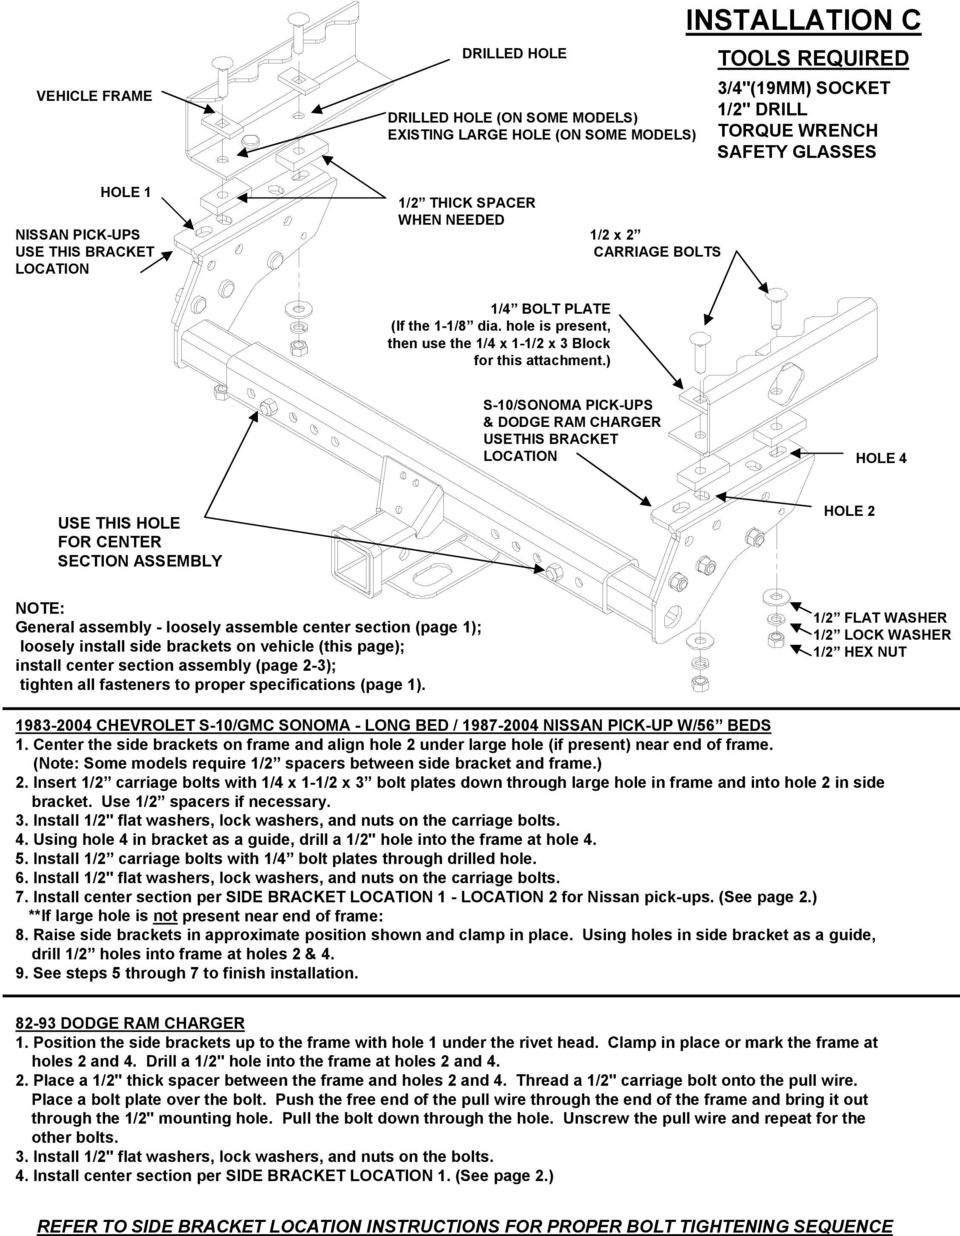 ) S-10/SONOMA PICK-UPS & DODGE RAM CHARGER USETHIS BRACKET LOCATION HOLE 4 USE THIS HOLE FOR CENTER SECTION ASSEMBLY HOLE 2 NOTE: General assembly - loosely assemble center section (page 1); loosely